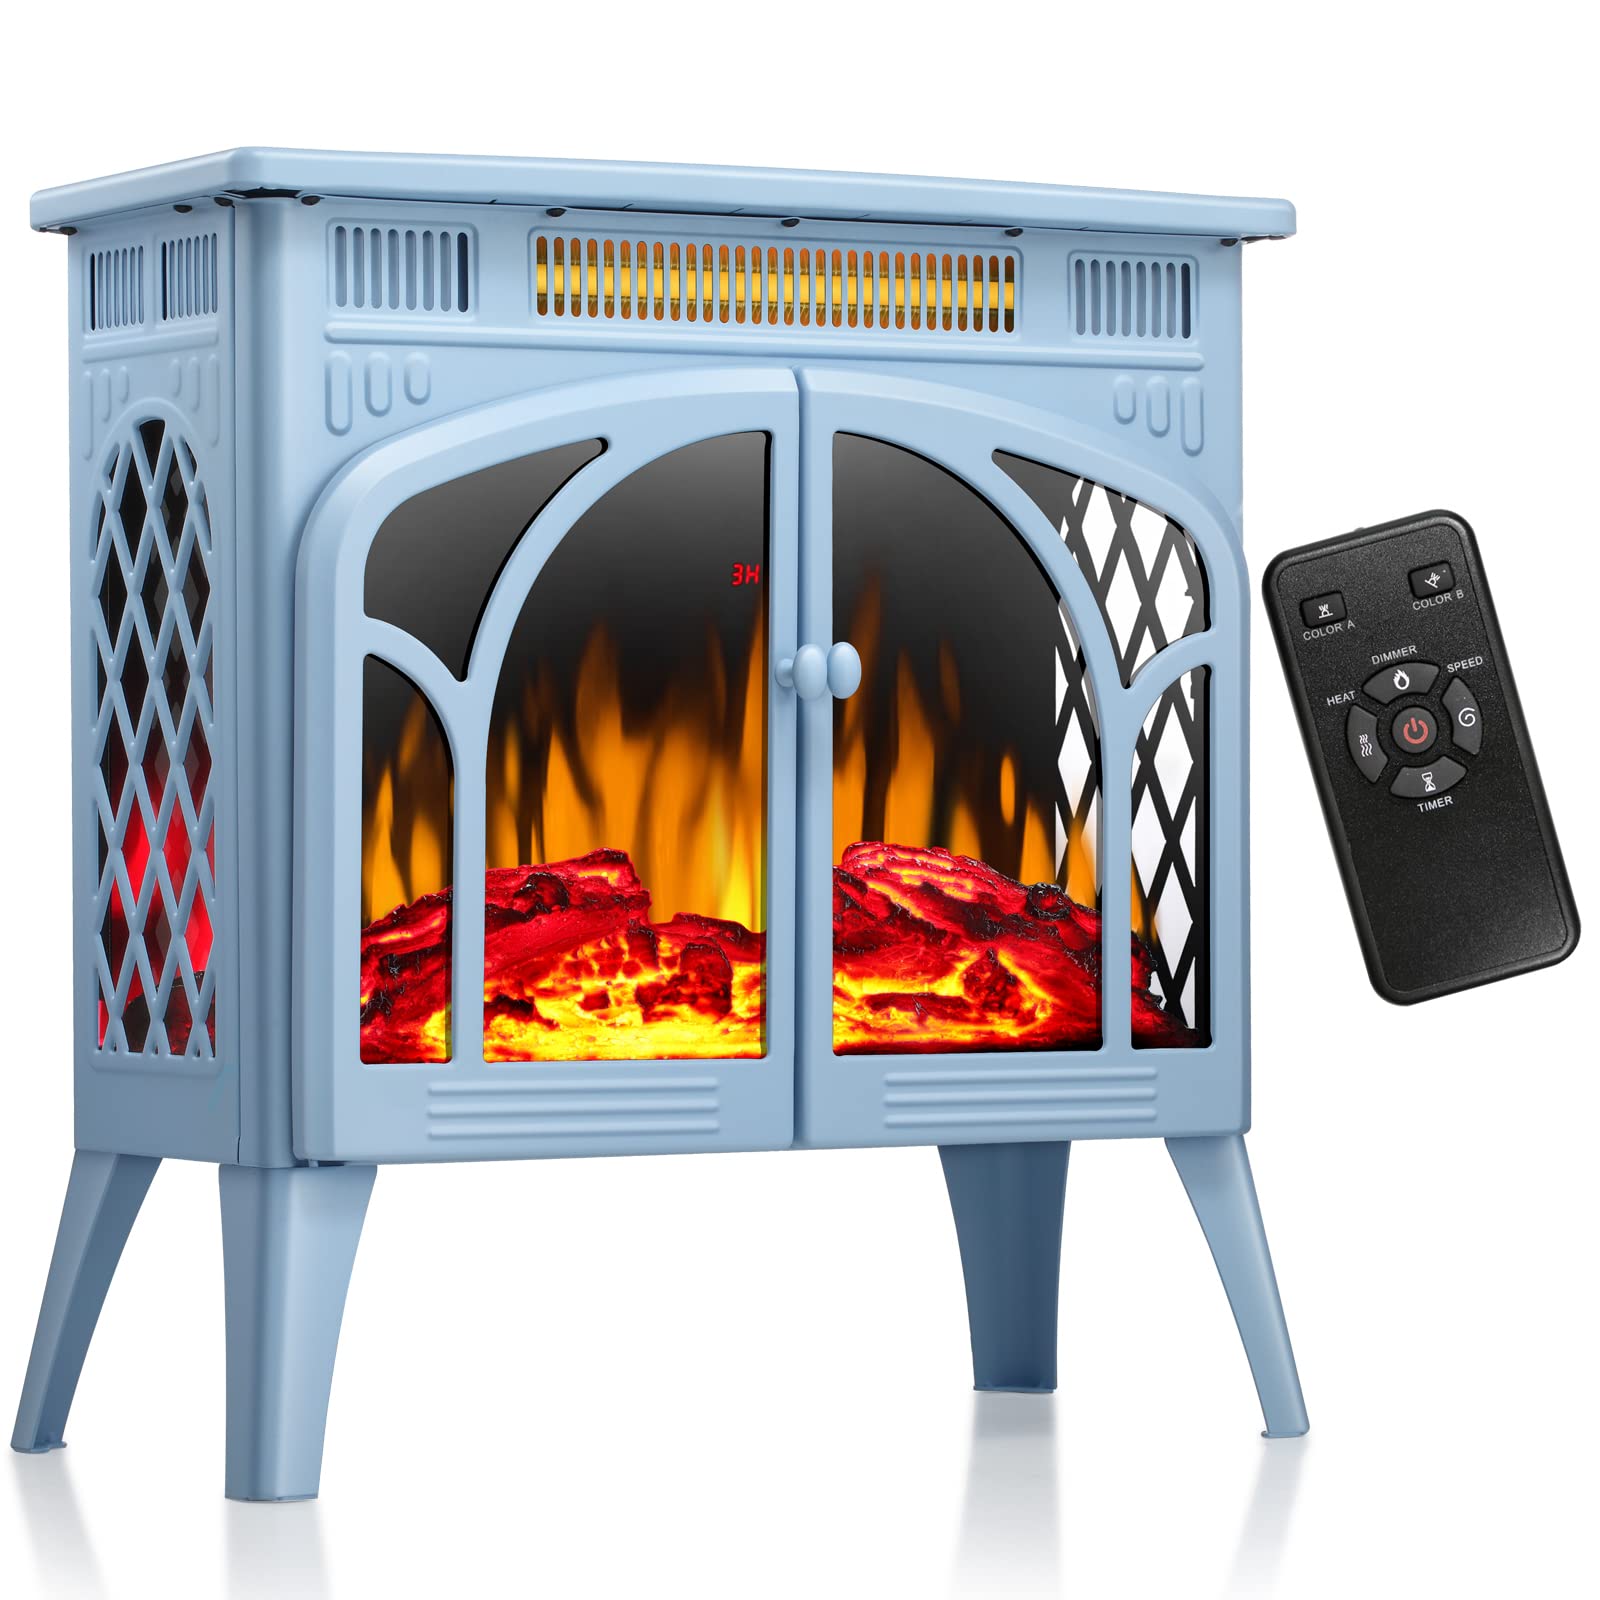 R.W.FLAME 24" Blue Electric Fireplace Stove Heater